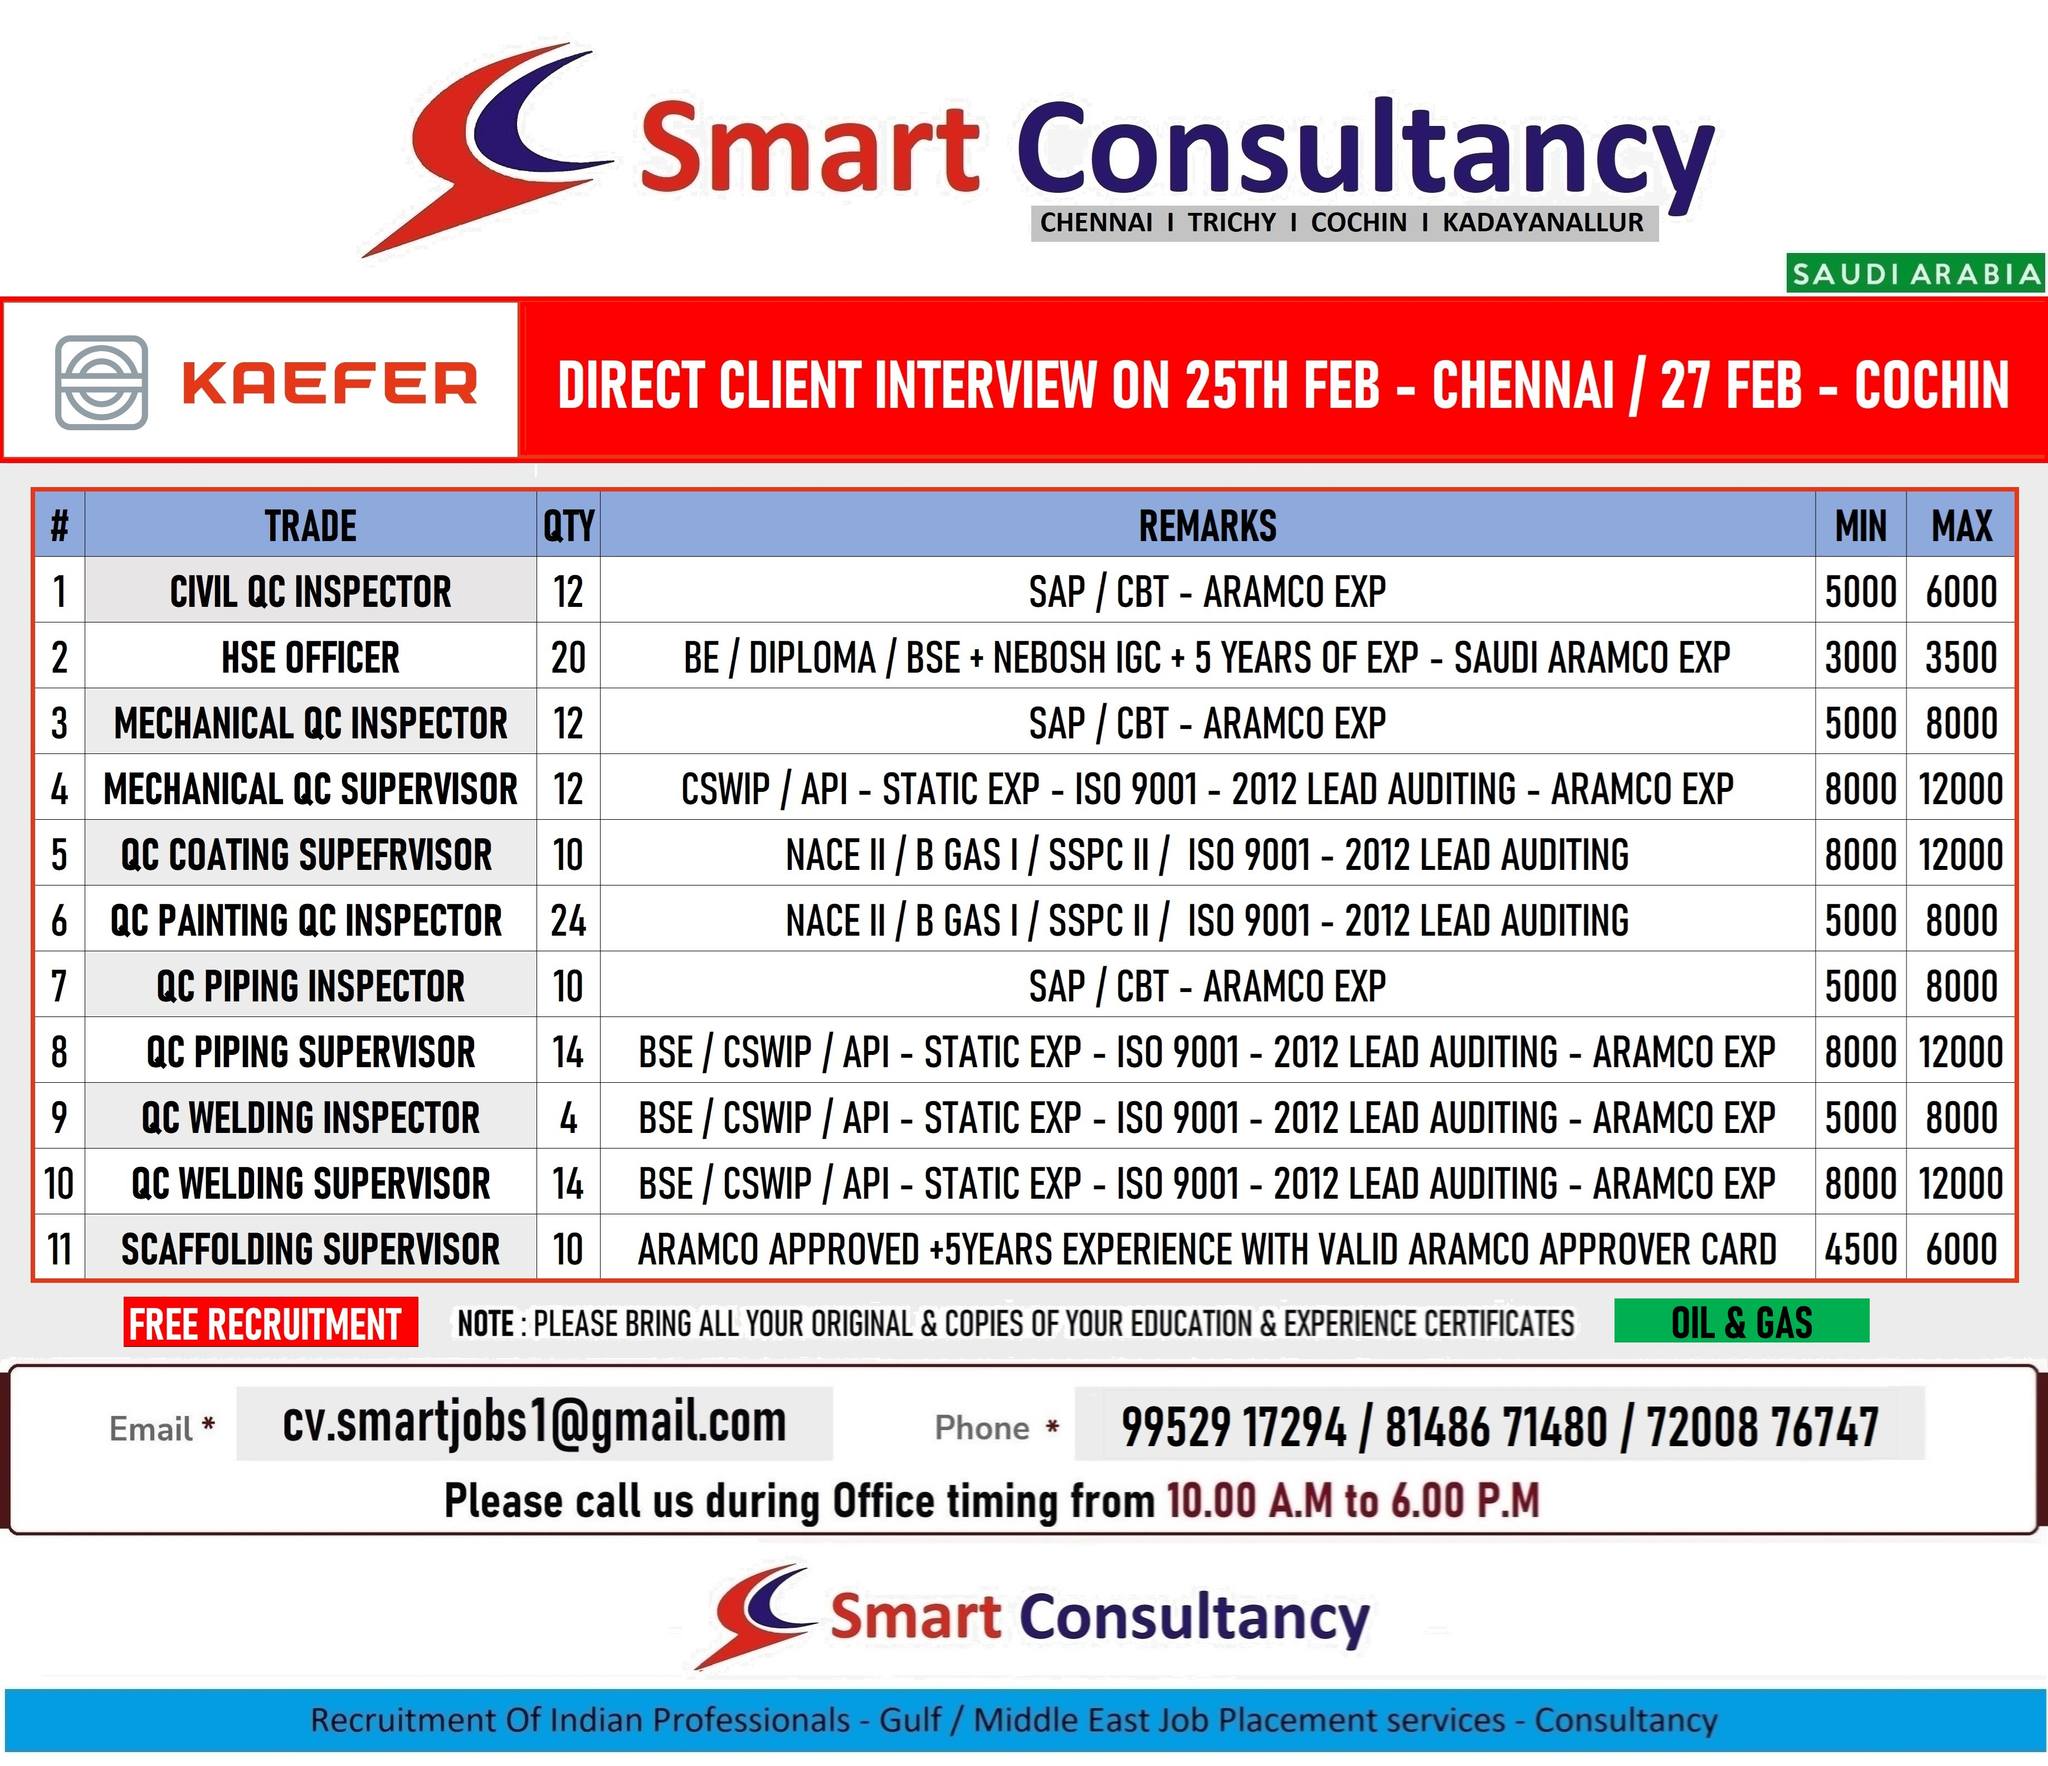 WANTED FOR A LEADING OIL & GAS COMPANY – SAUDI / DIRECT CLIENT INTERVIEW ON 25TH FEB – CHENNAI / 27 FEB – COCHIN